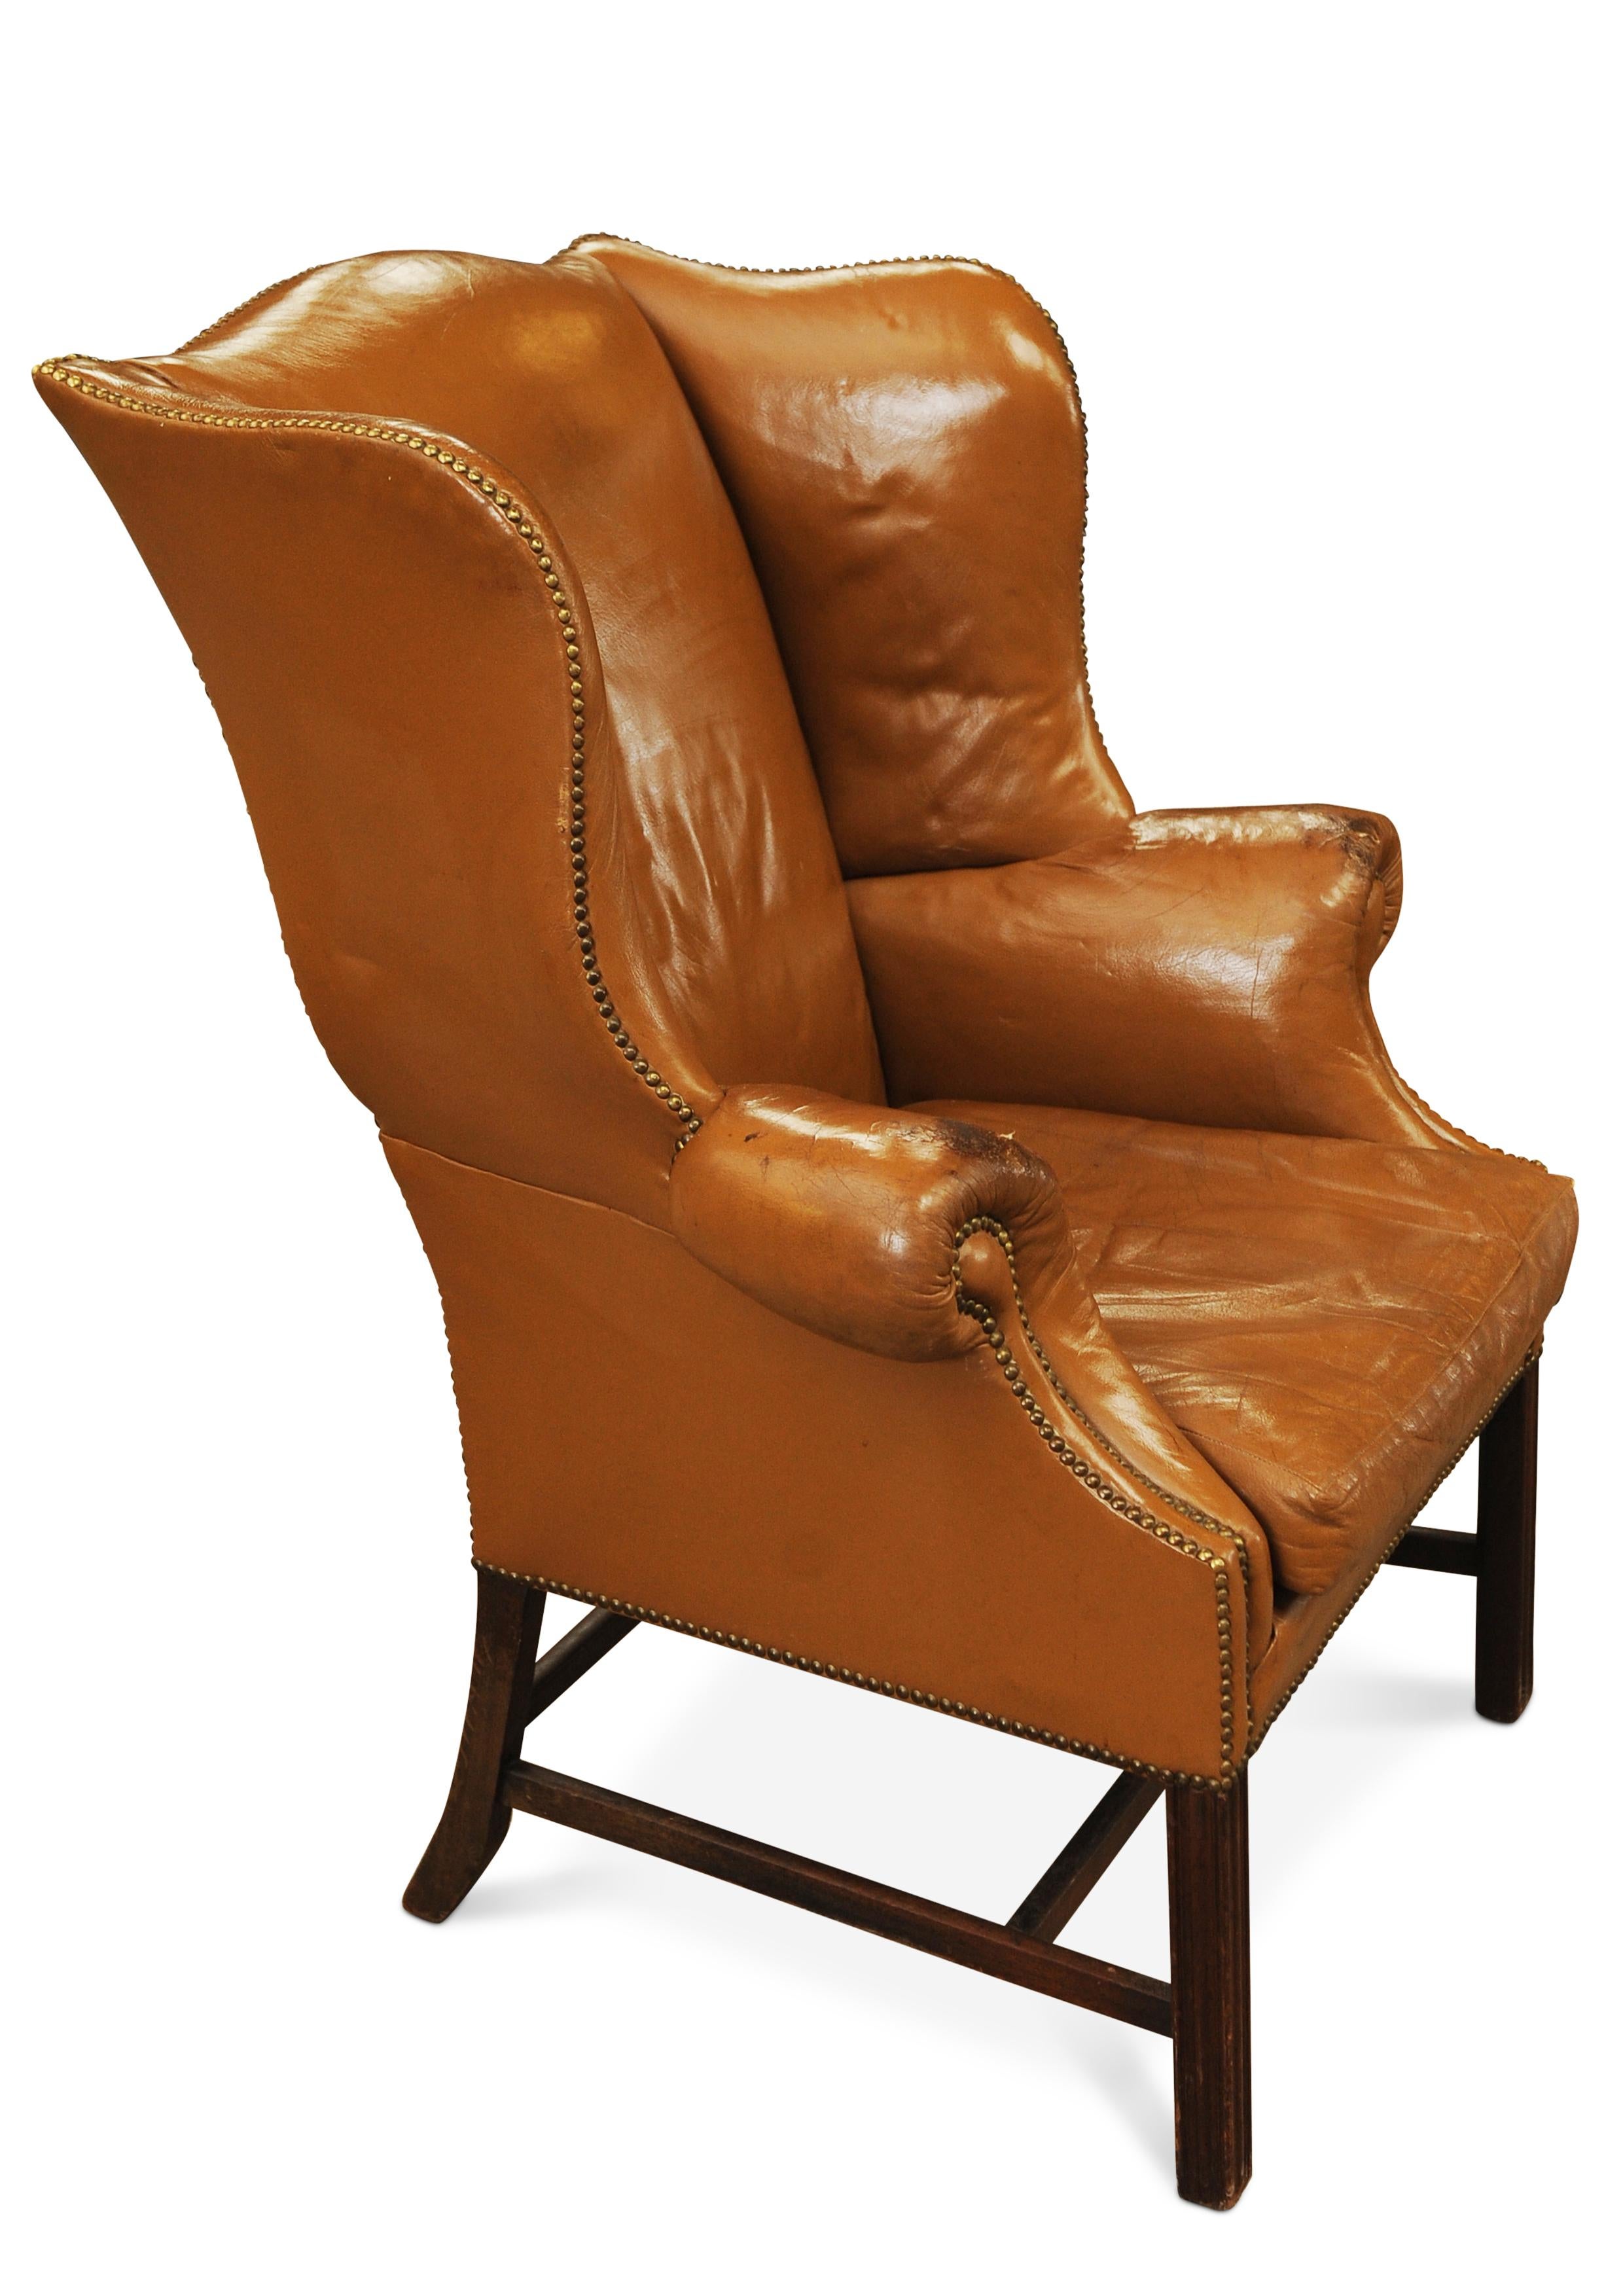 19th Century Georgian Mahogany And Tan Leather Wing Back Armchair With Brass Studded Border.

Featuring a shaped back with out-scrolled arms raised over squared fluted front legs, shaped back legs joined with H stretcher, upholstered in a tan